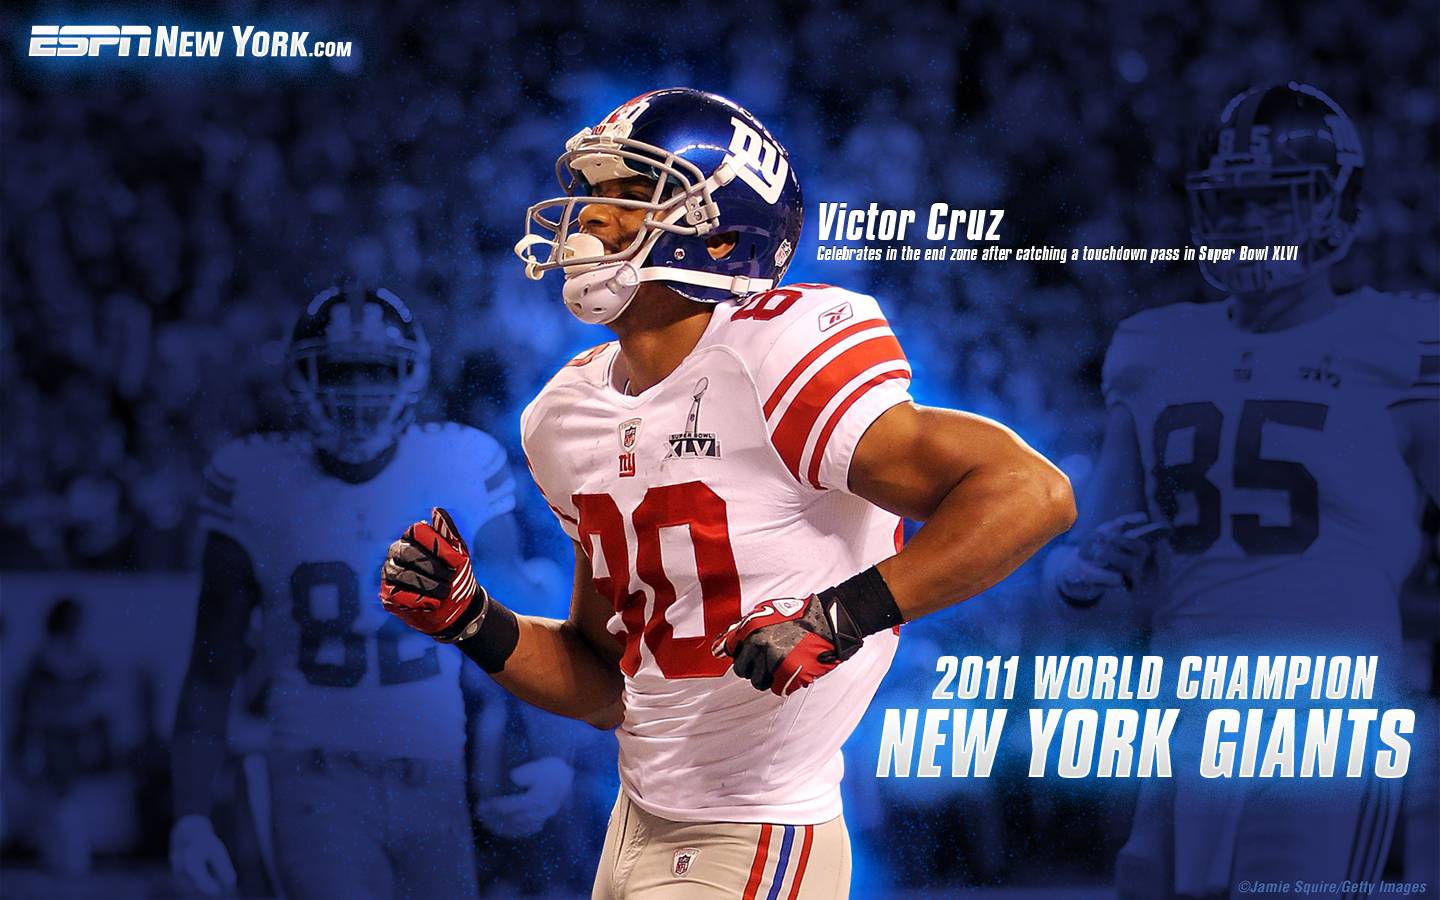 Guys Asked Us For More New York Giants Wallpaper So Here You Have